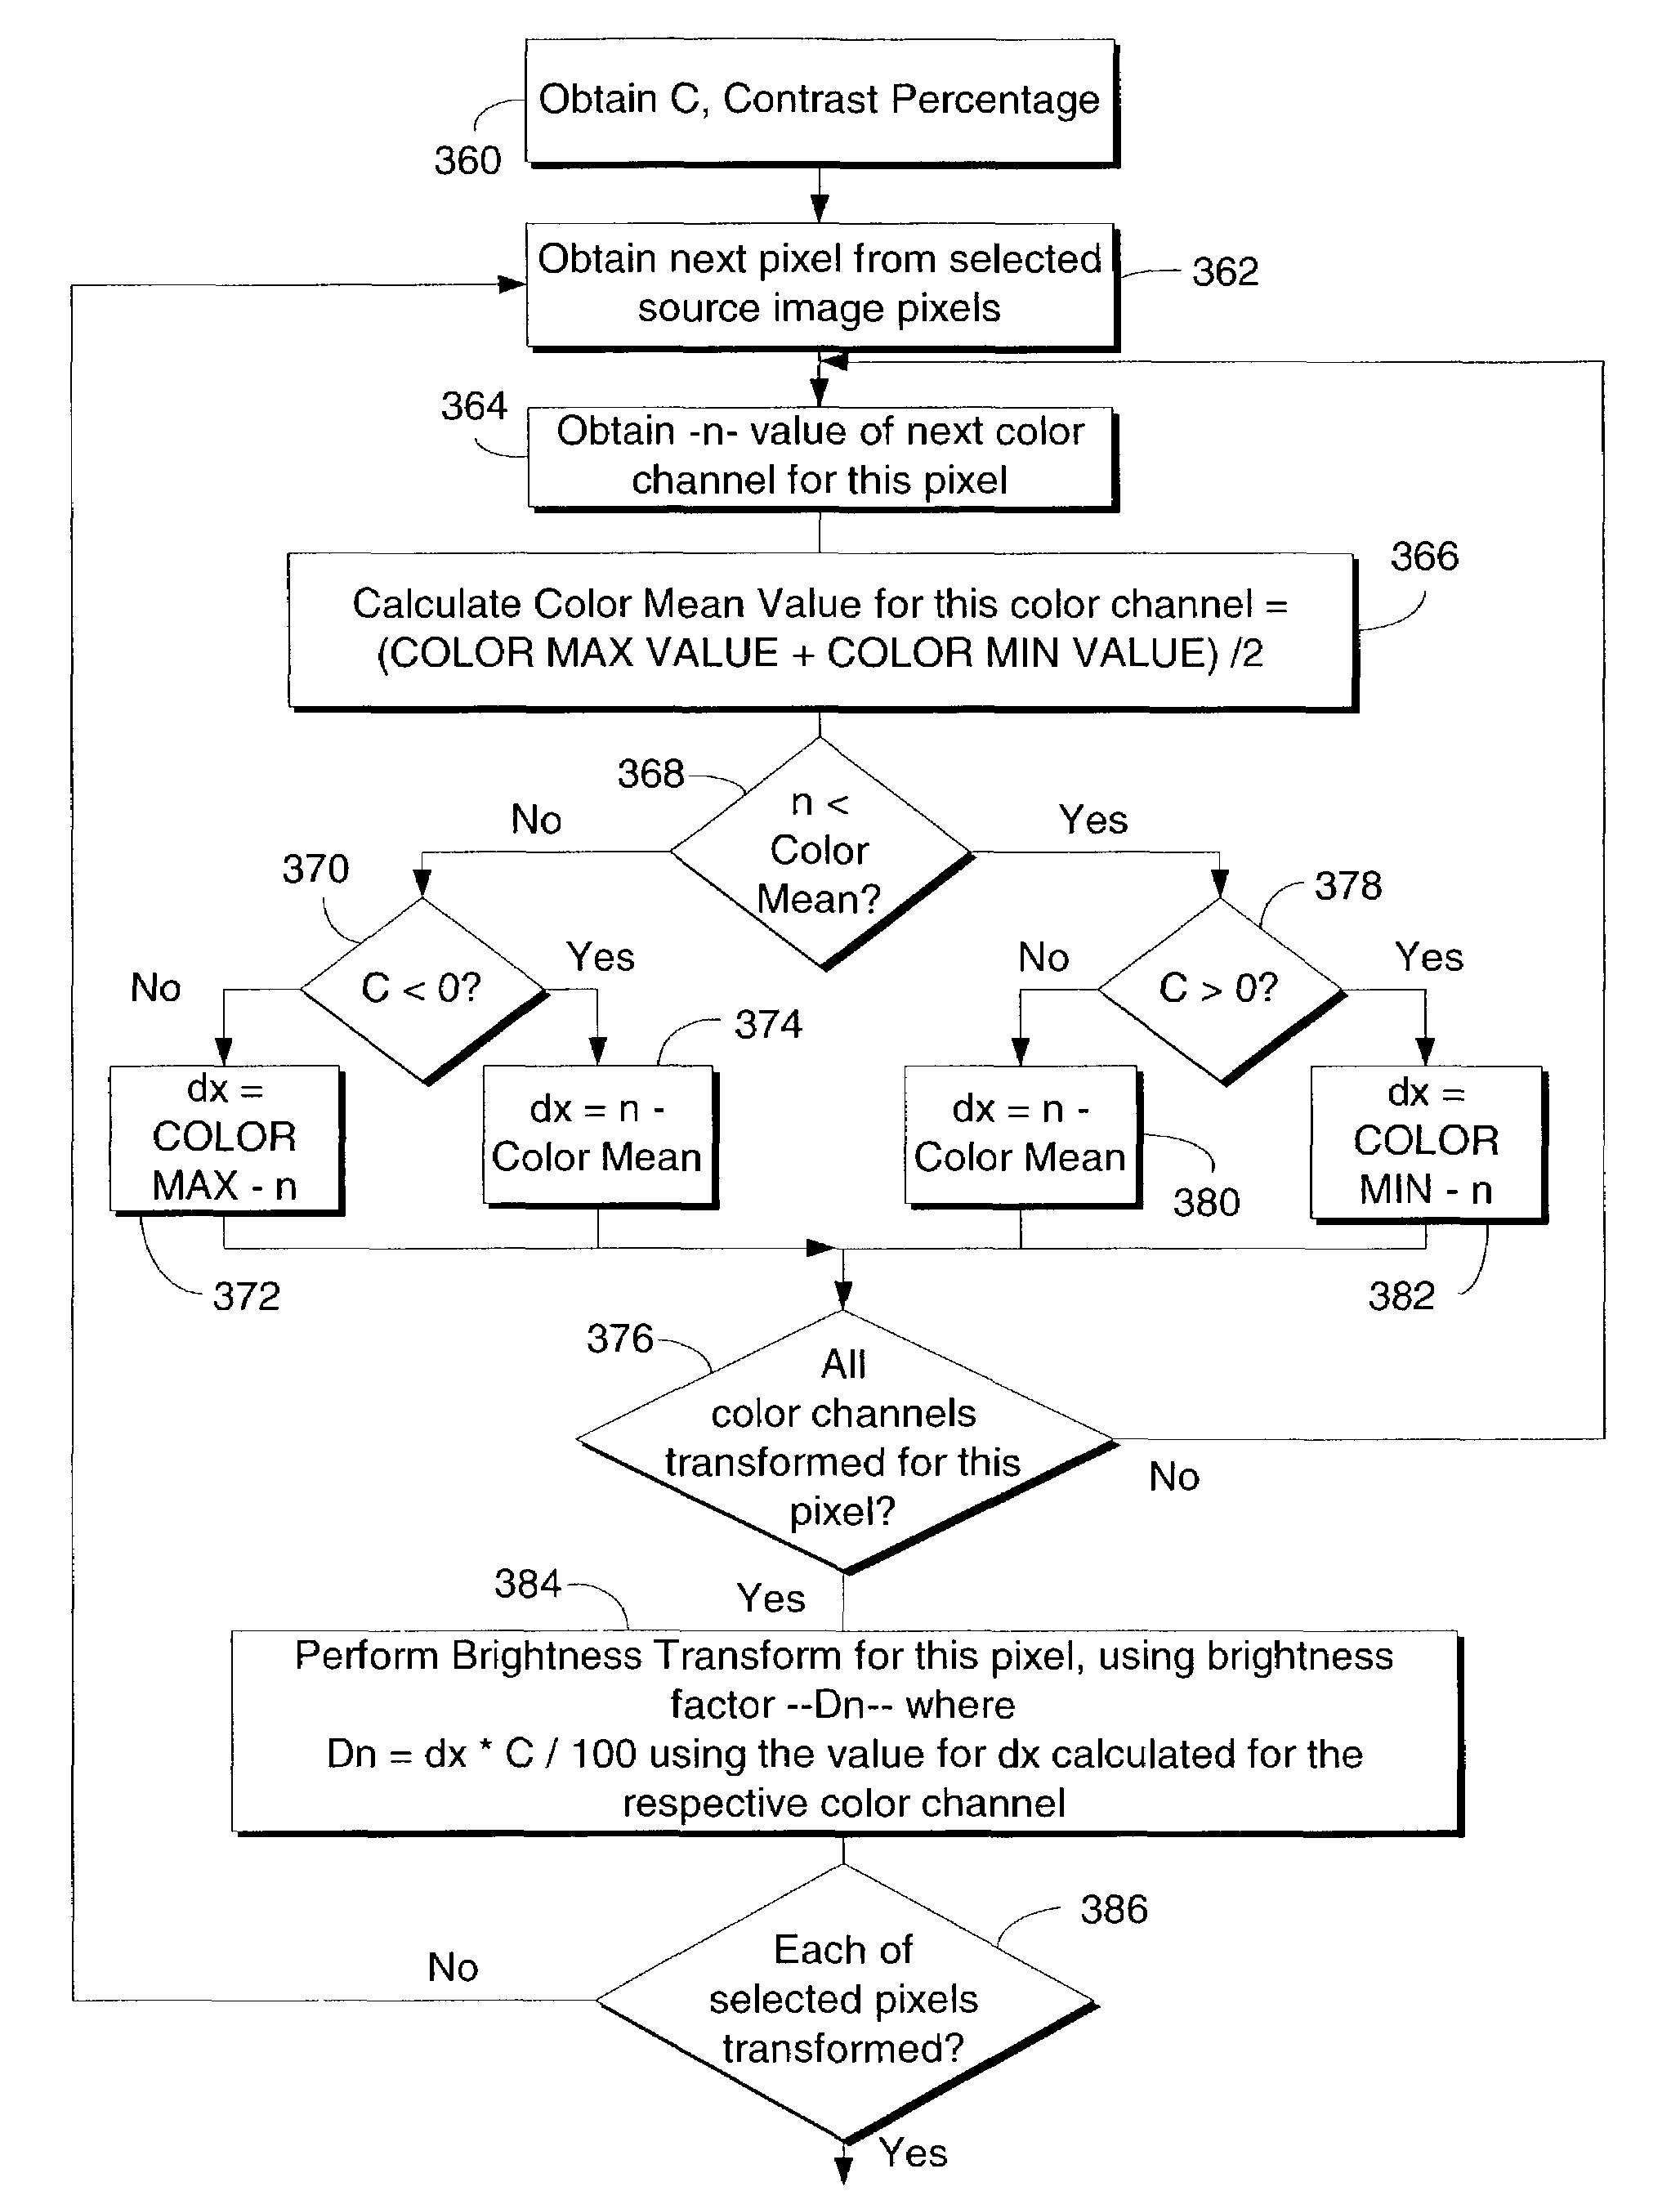 Dynamic generation of visual style variants for a graphical user interface